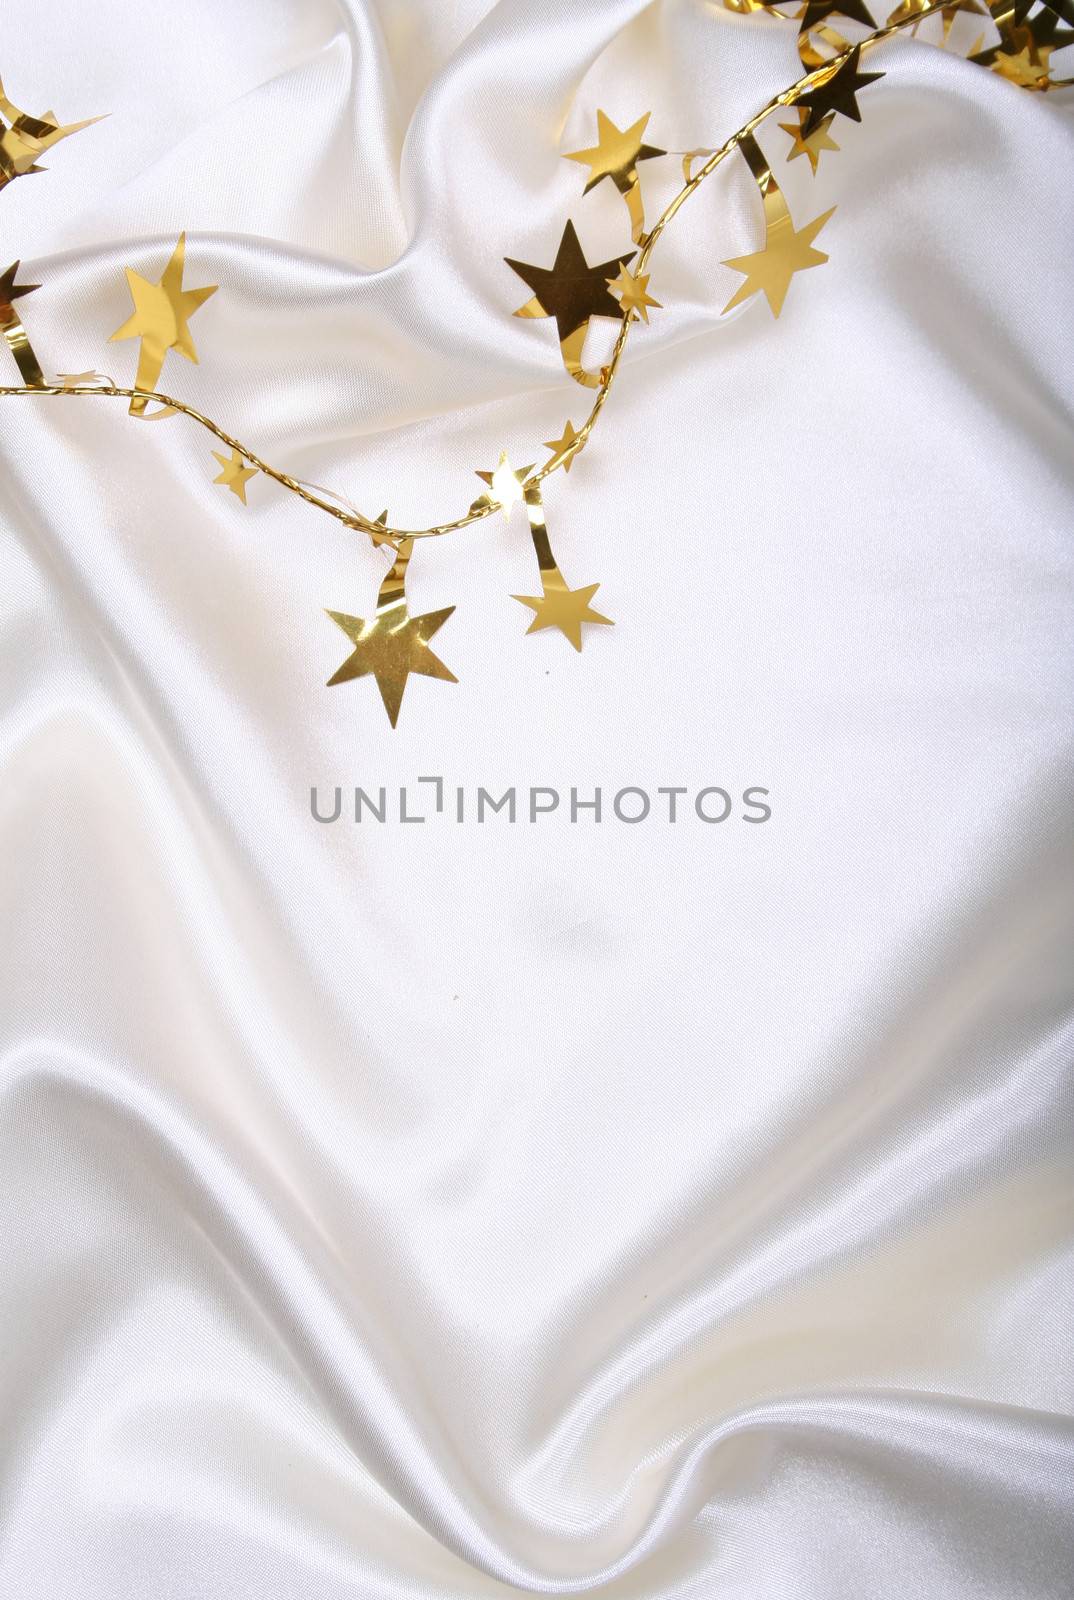 Golden stars and spangles on white silk as background